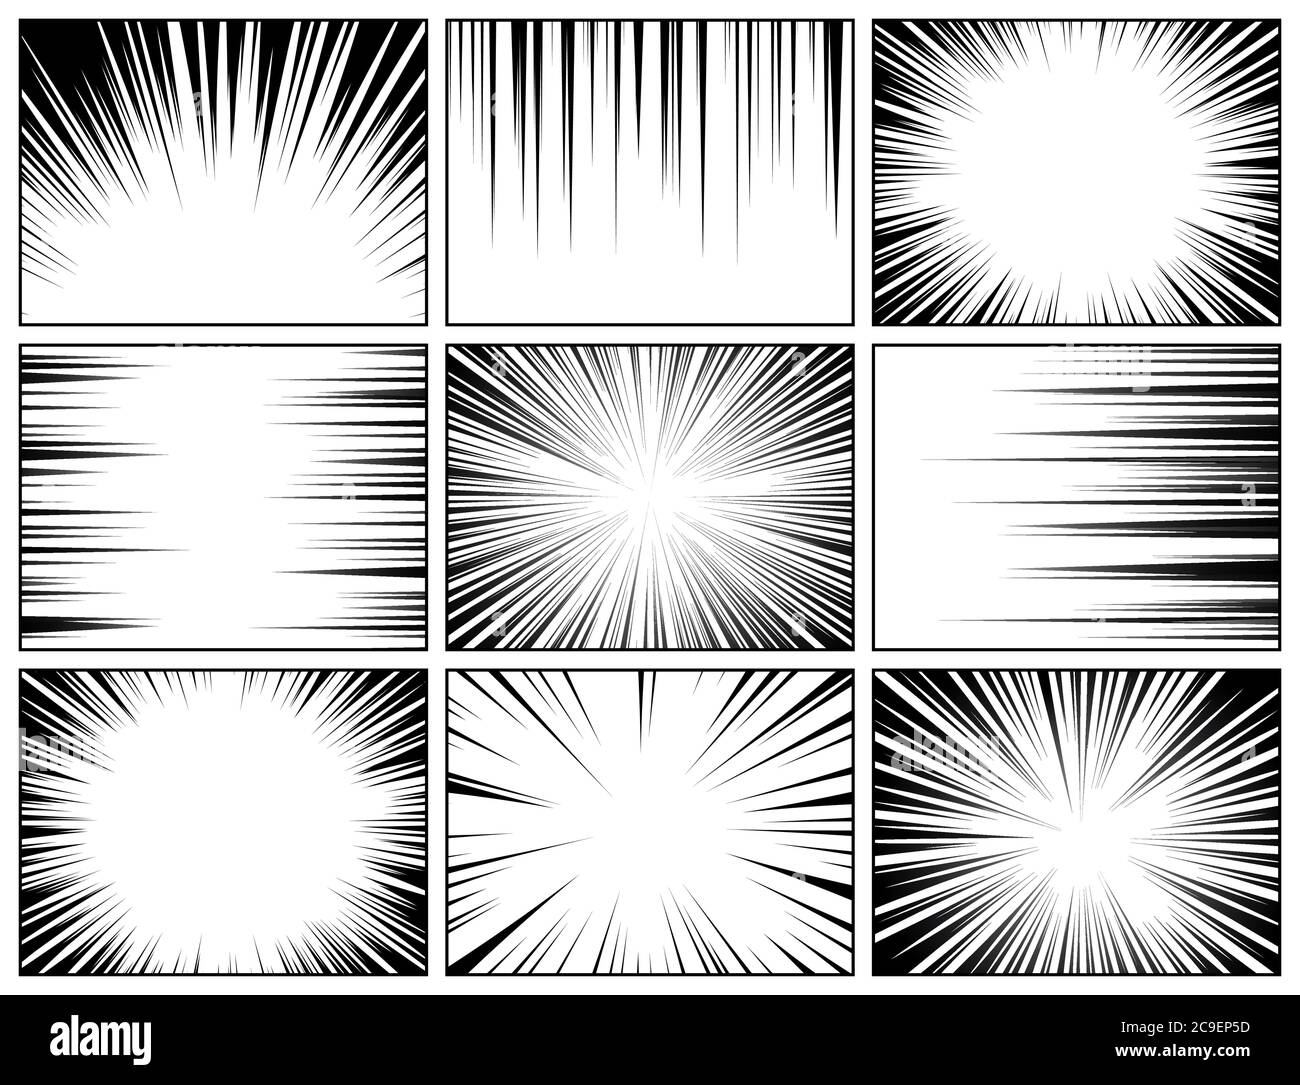 Radial Line Drawing Action Speed Lines Stripes Stock Illustration